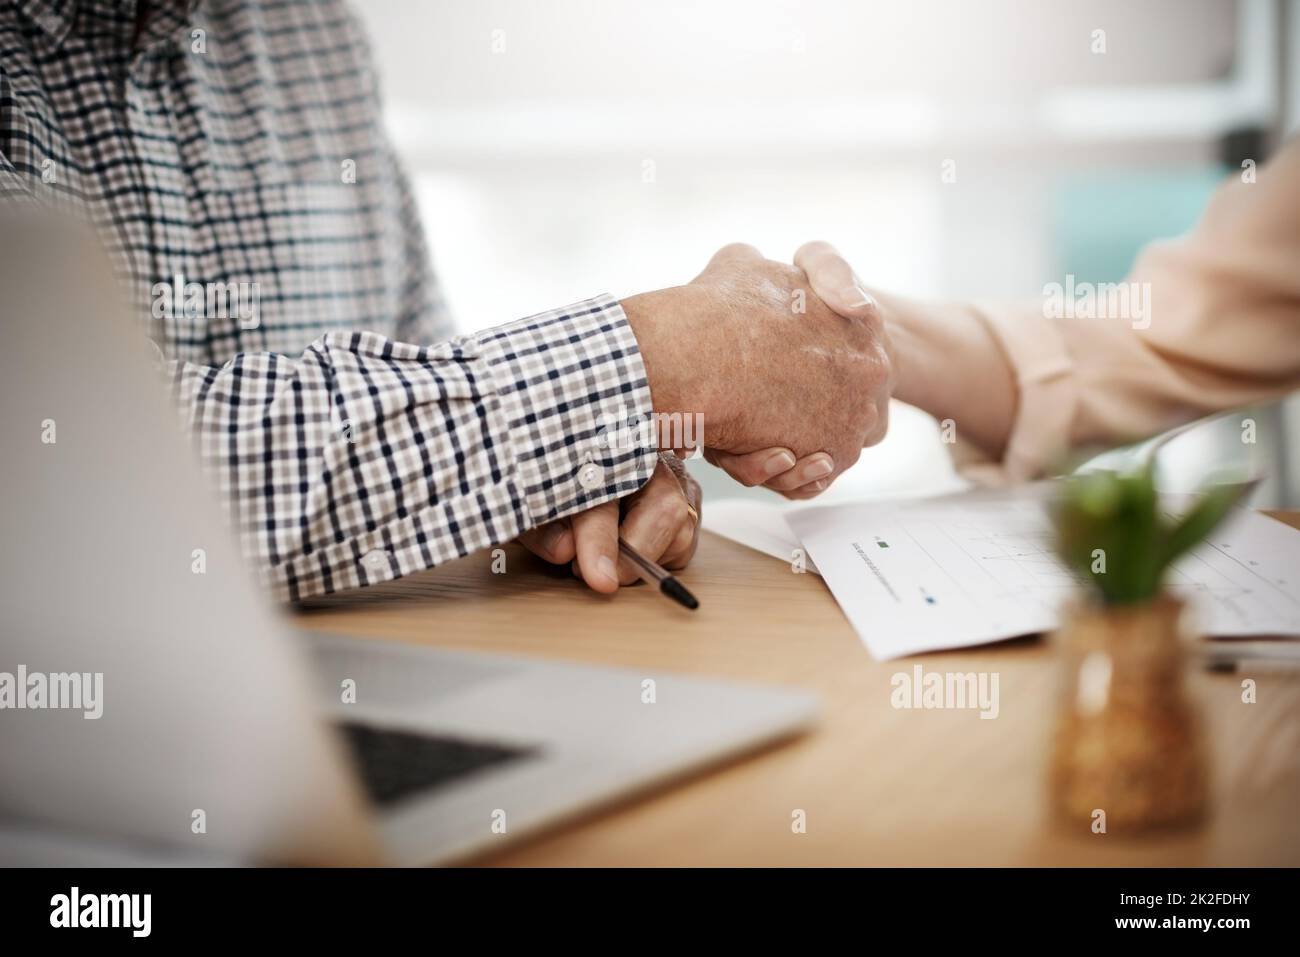 Theyve reached an agreement. Cropped shot of an unrecognizable senior couple shaking hands while working on their finances at home. Stock Photo